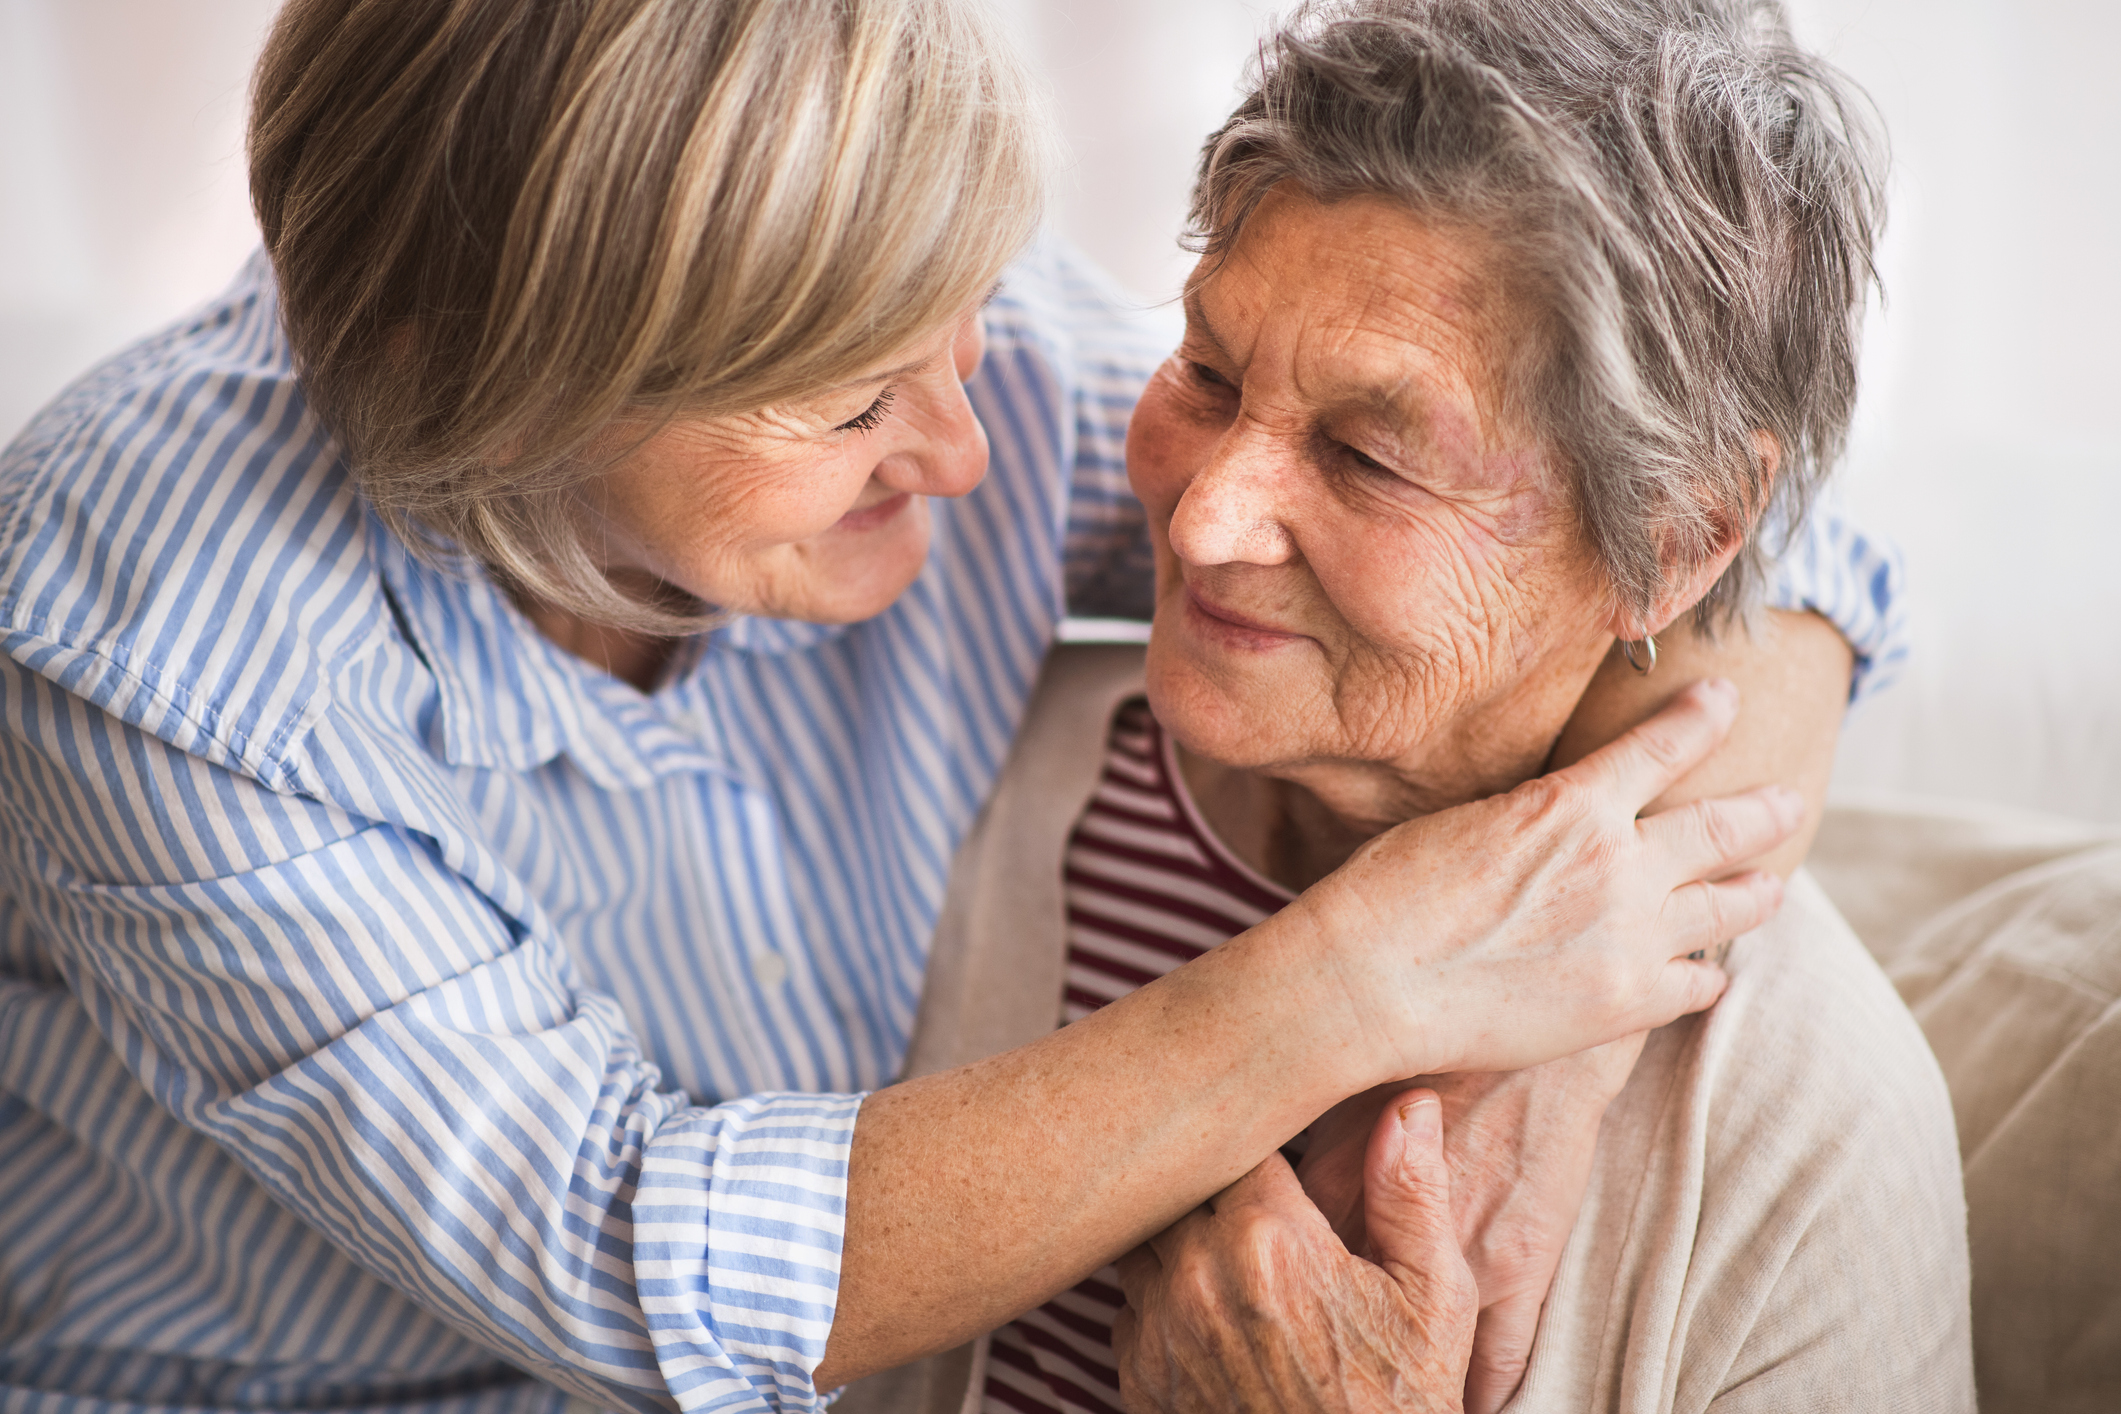 Woman taking care of elderly loved one